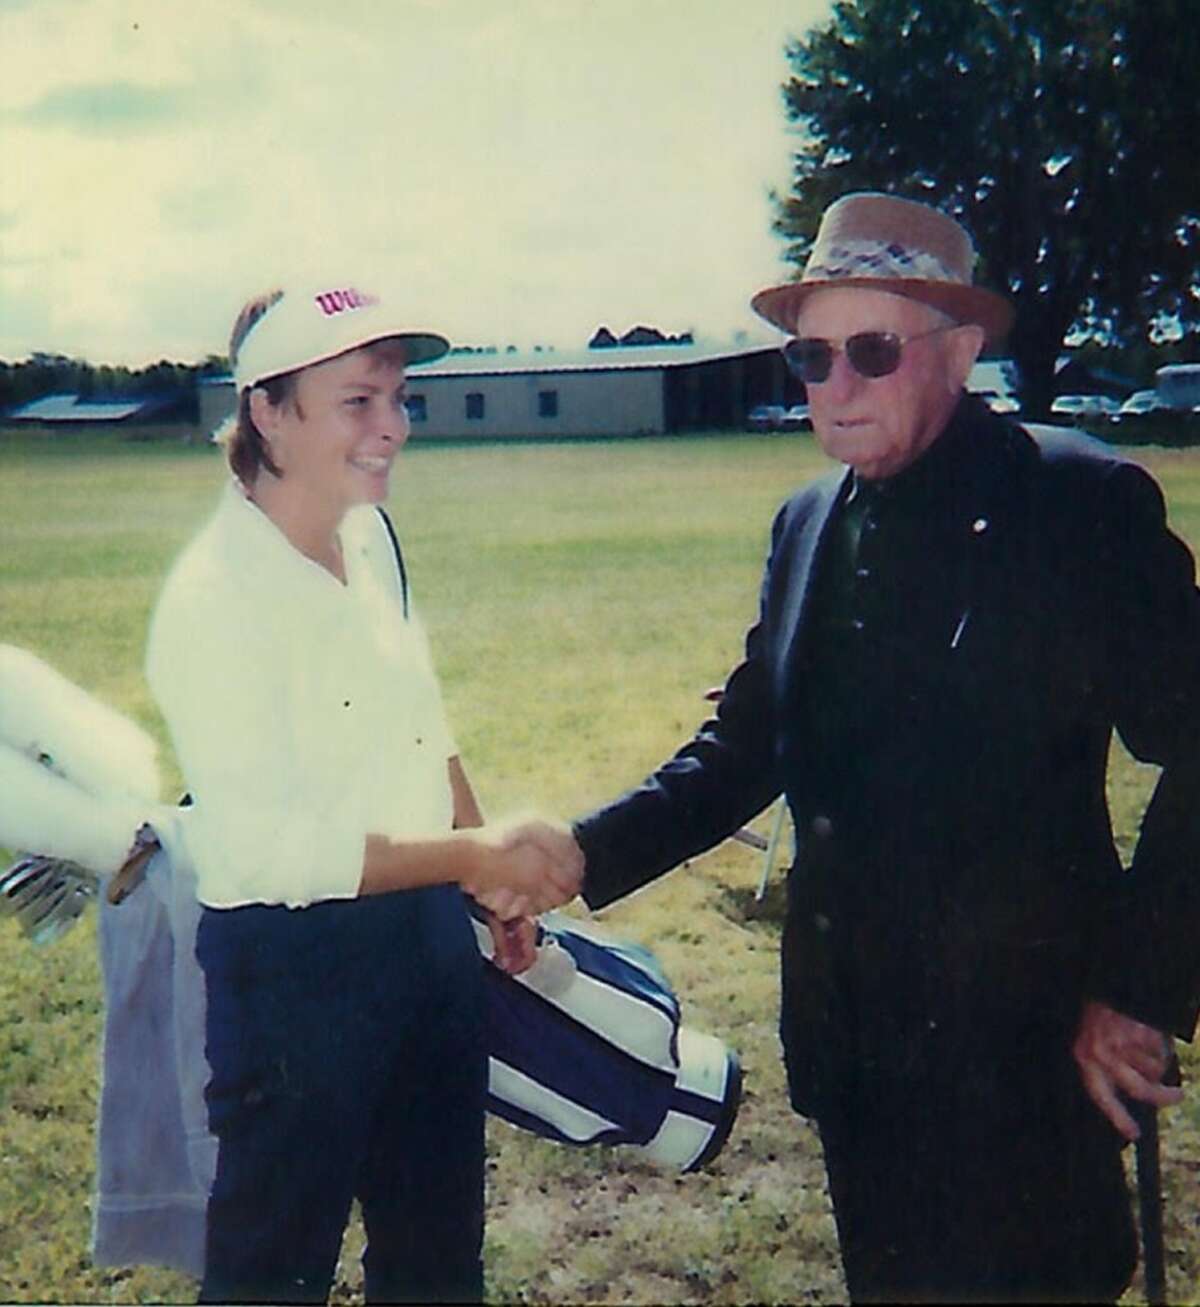 Broadcaster Dottie Pepper of Saratoga Springs will appear on "Antiques Roadshow" at 8 p.m. Monday, May 3, on PBS. Pepper with George Pulver Sr. during a lesson in the late summer 1984 at Duffer’s Den, just prior to her return to Furman University. The photo was taken by Pulver's daughter Madelyn.